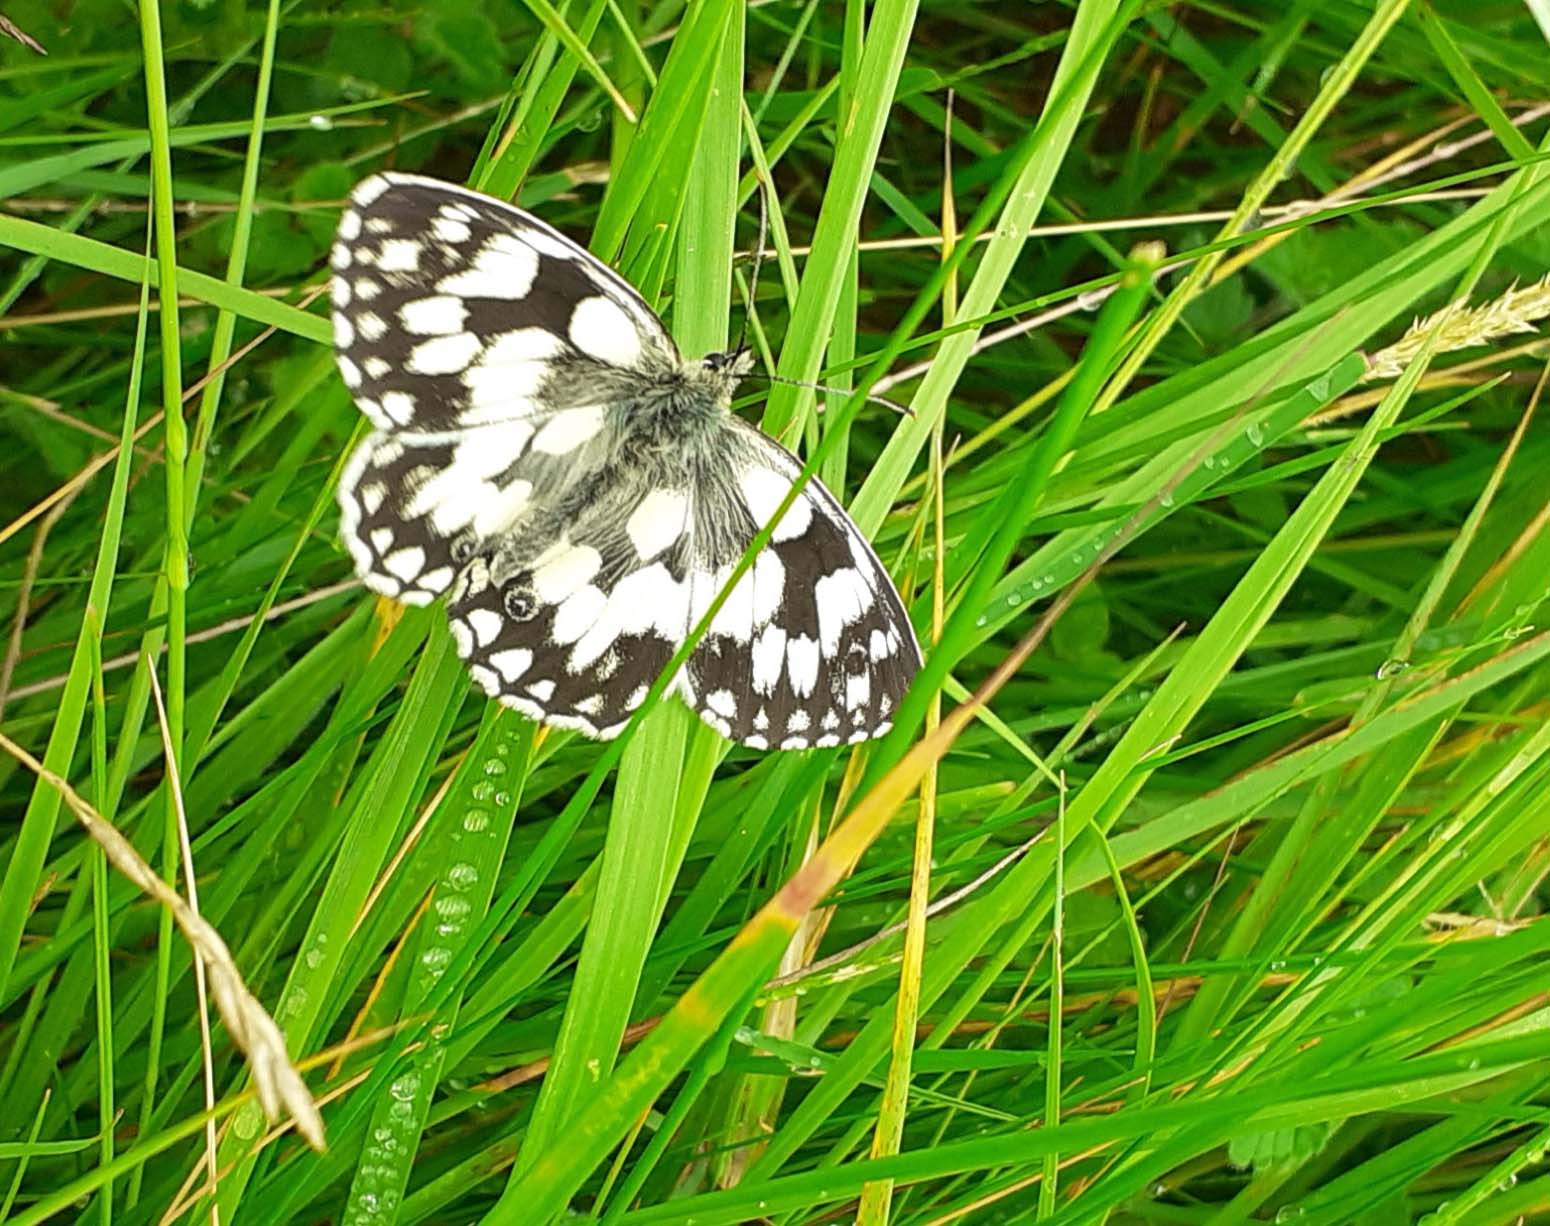 A butterfly resting on thick green grass